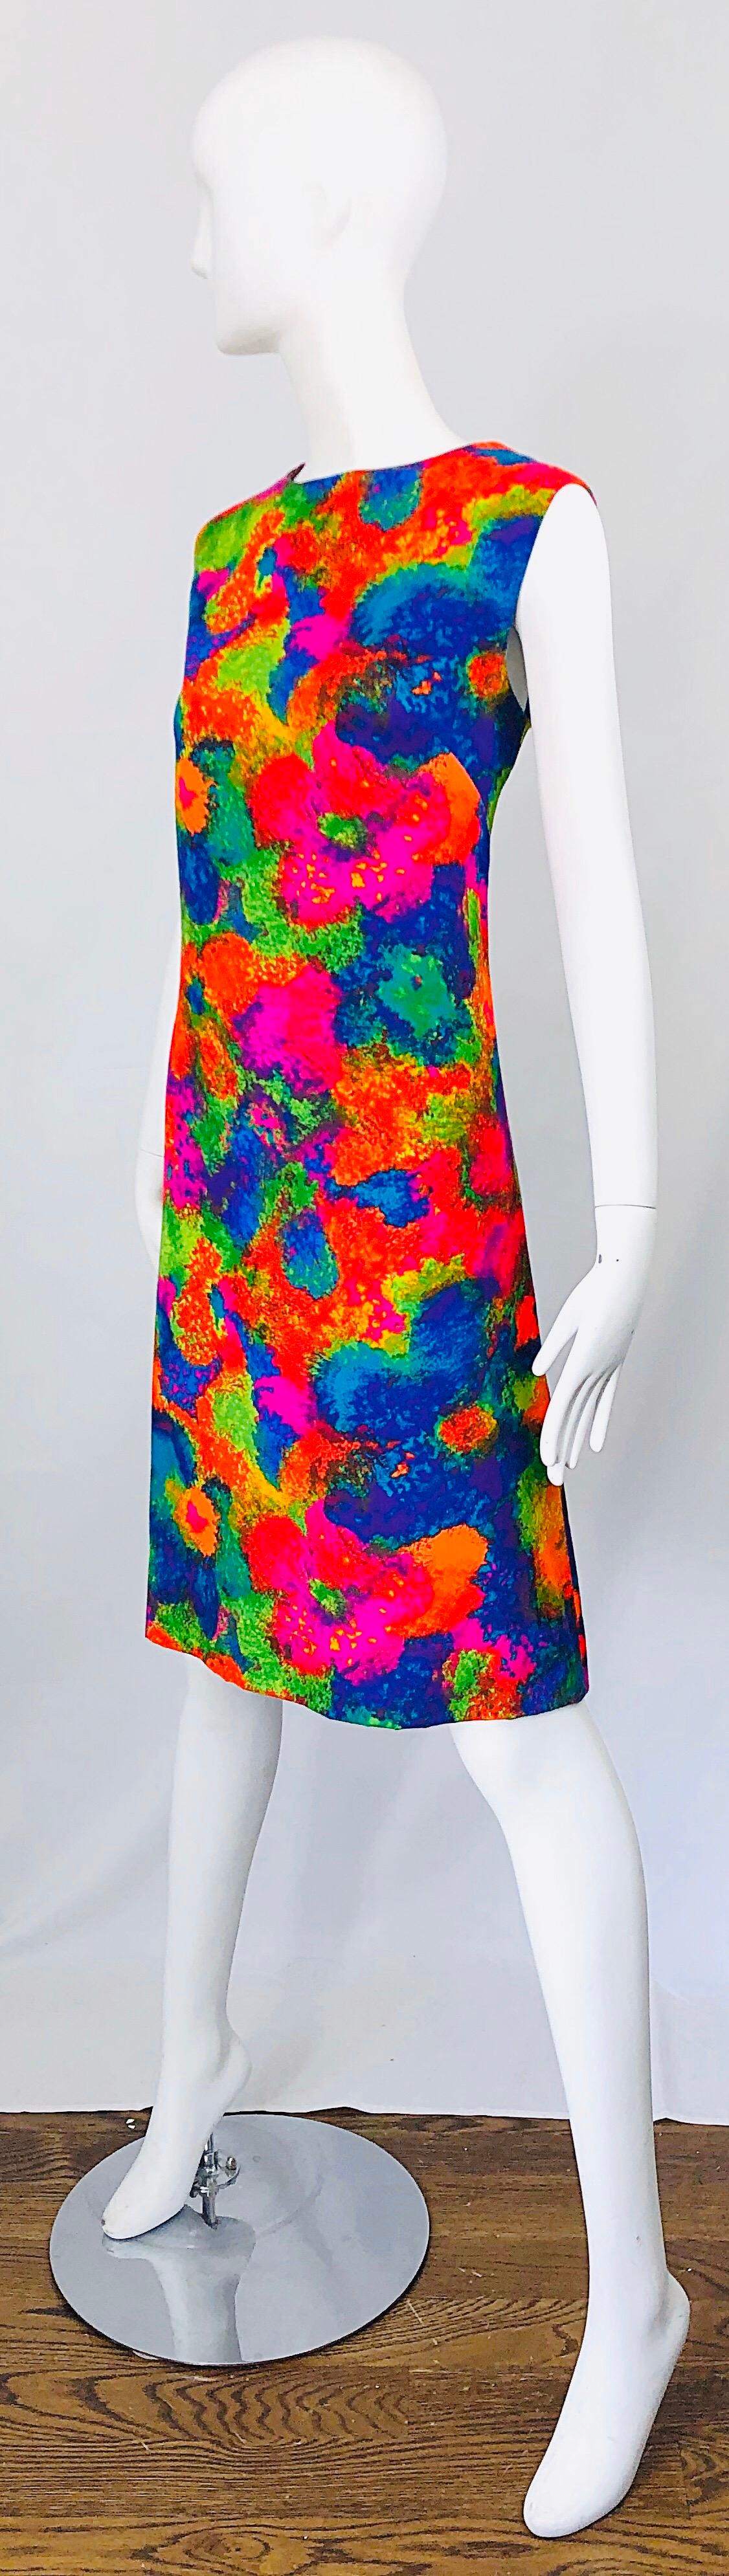 Chic 1960s Larger Size Neon Abstract Flower Print Vintage 60s Cotton Shift Dress For Sale 2